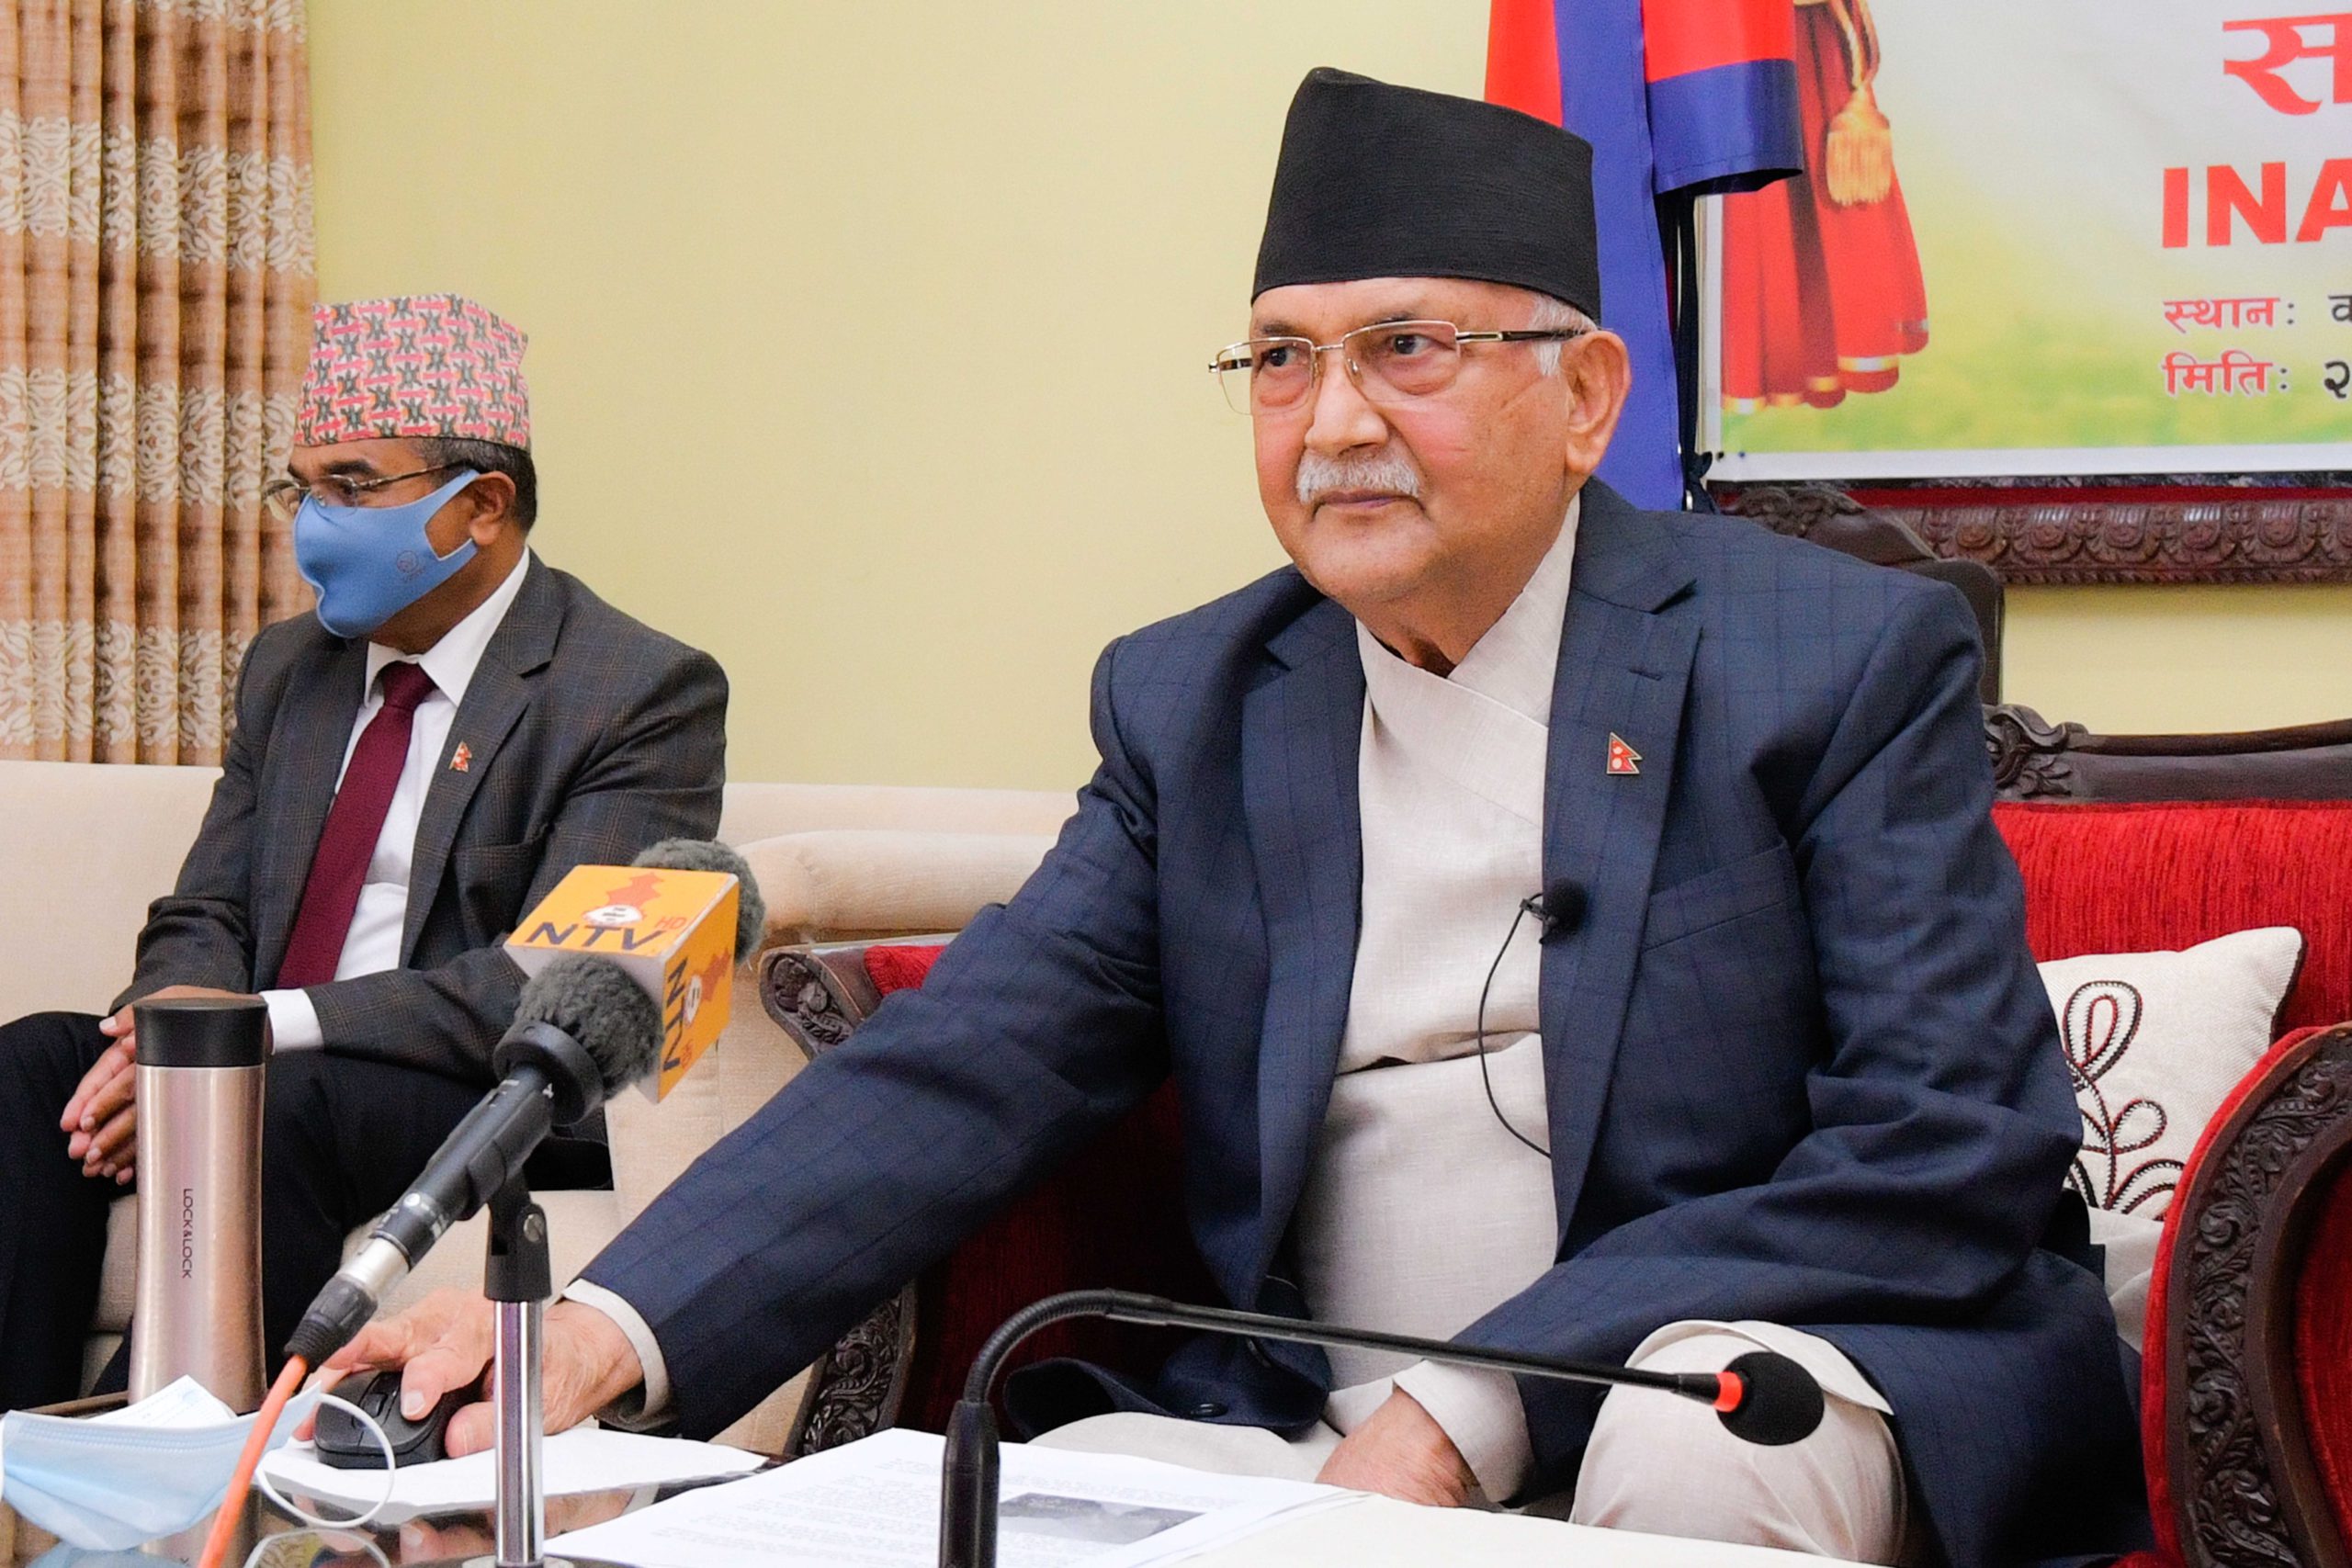 KP Sharma Oli resigns as PM, says court’s verdict against multiparty parliamentary system